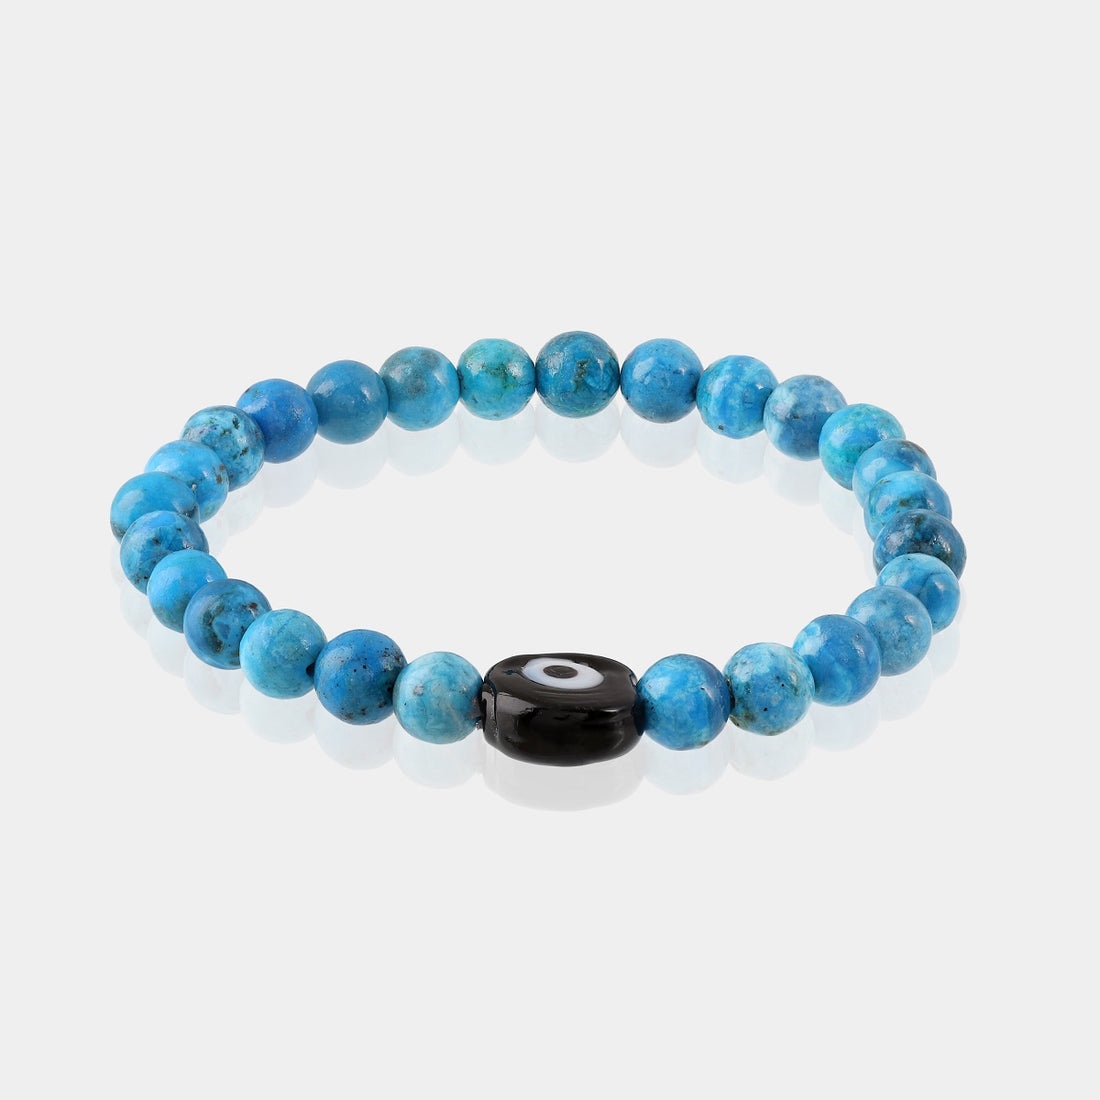 A bracelet adorned with smooth round Turquoise gemstone beads, showcasing a calming blue hue reminiscent of the sky and sea.